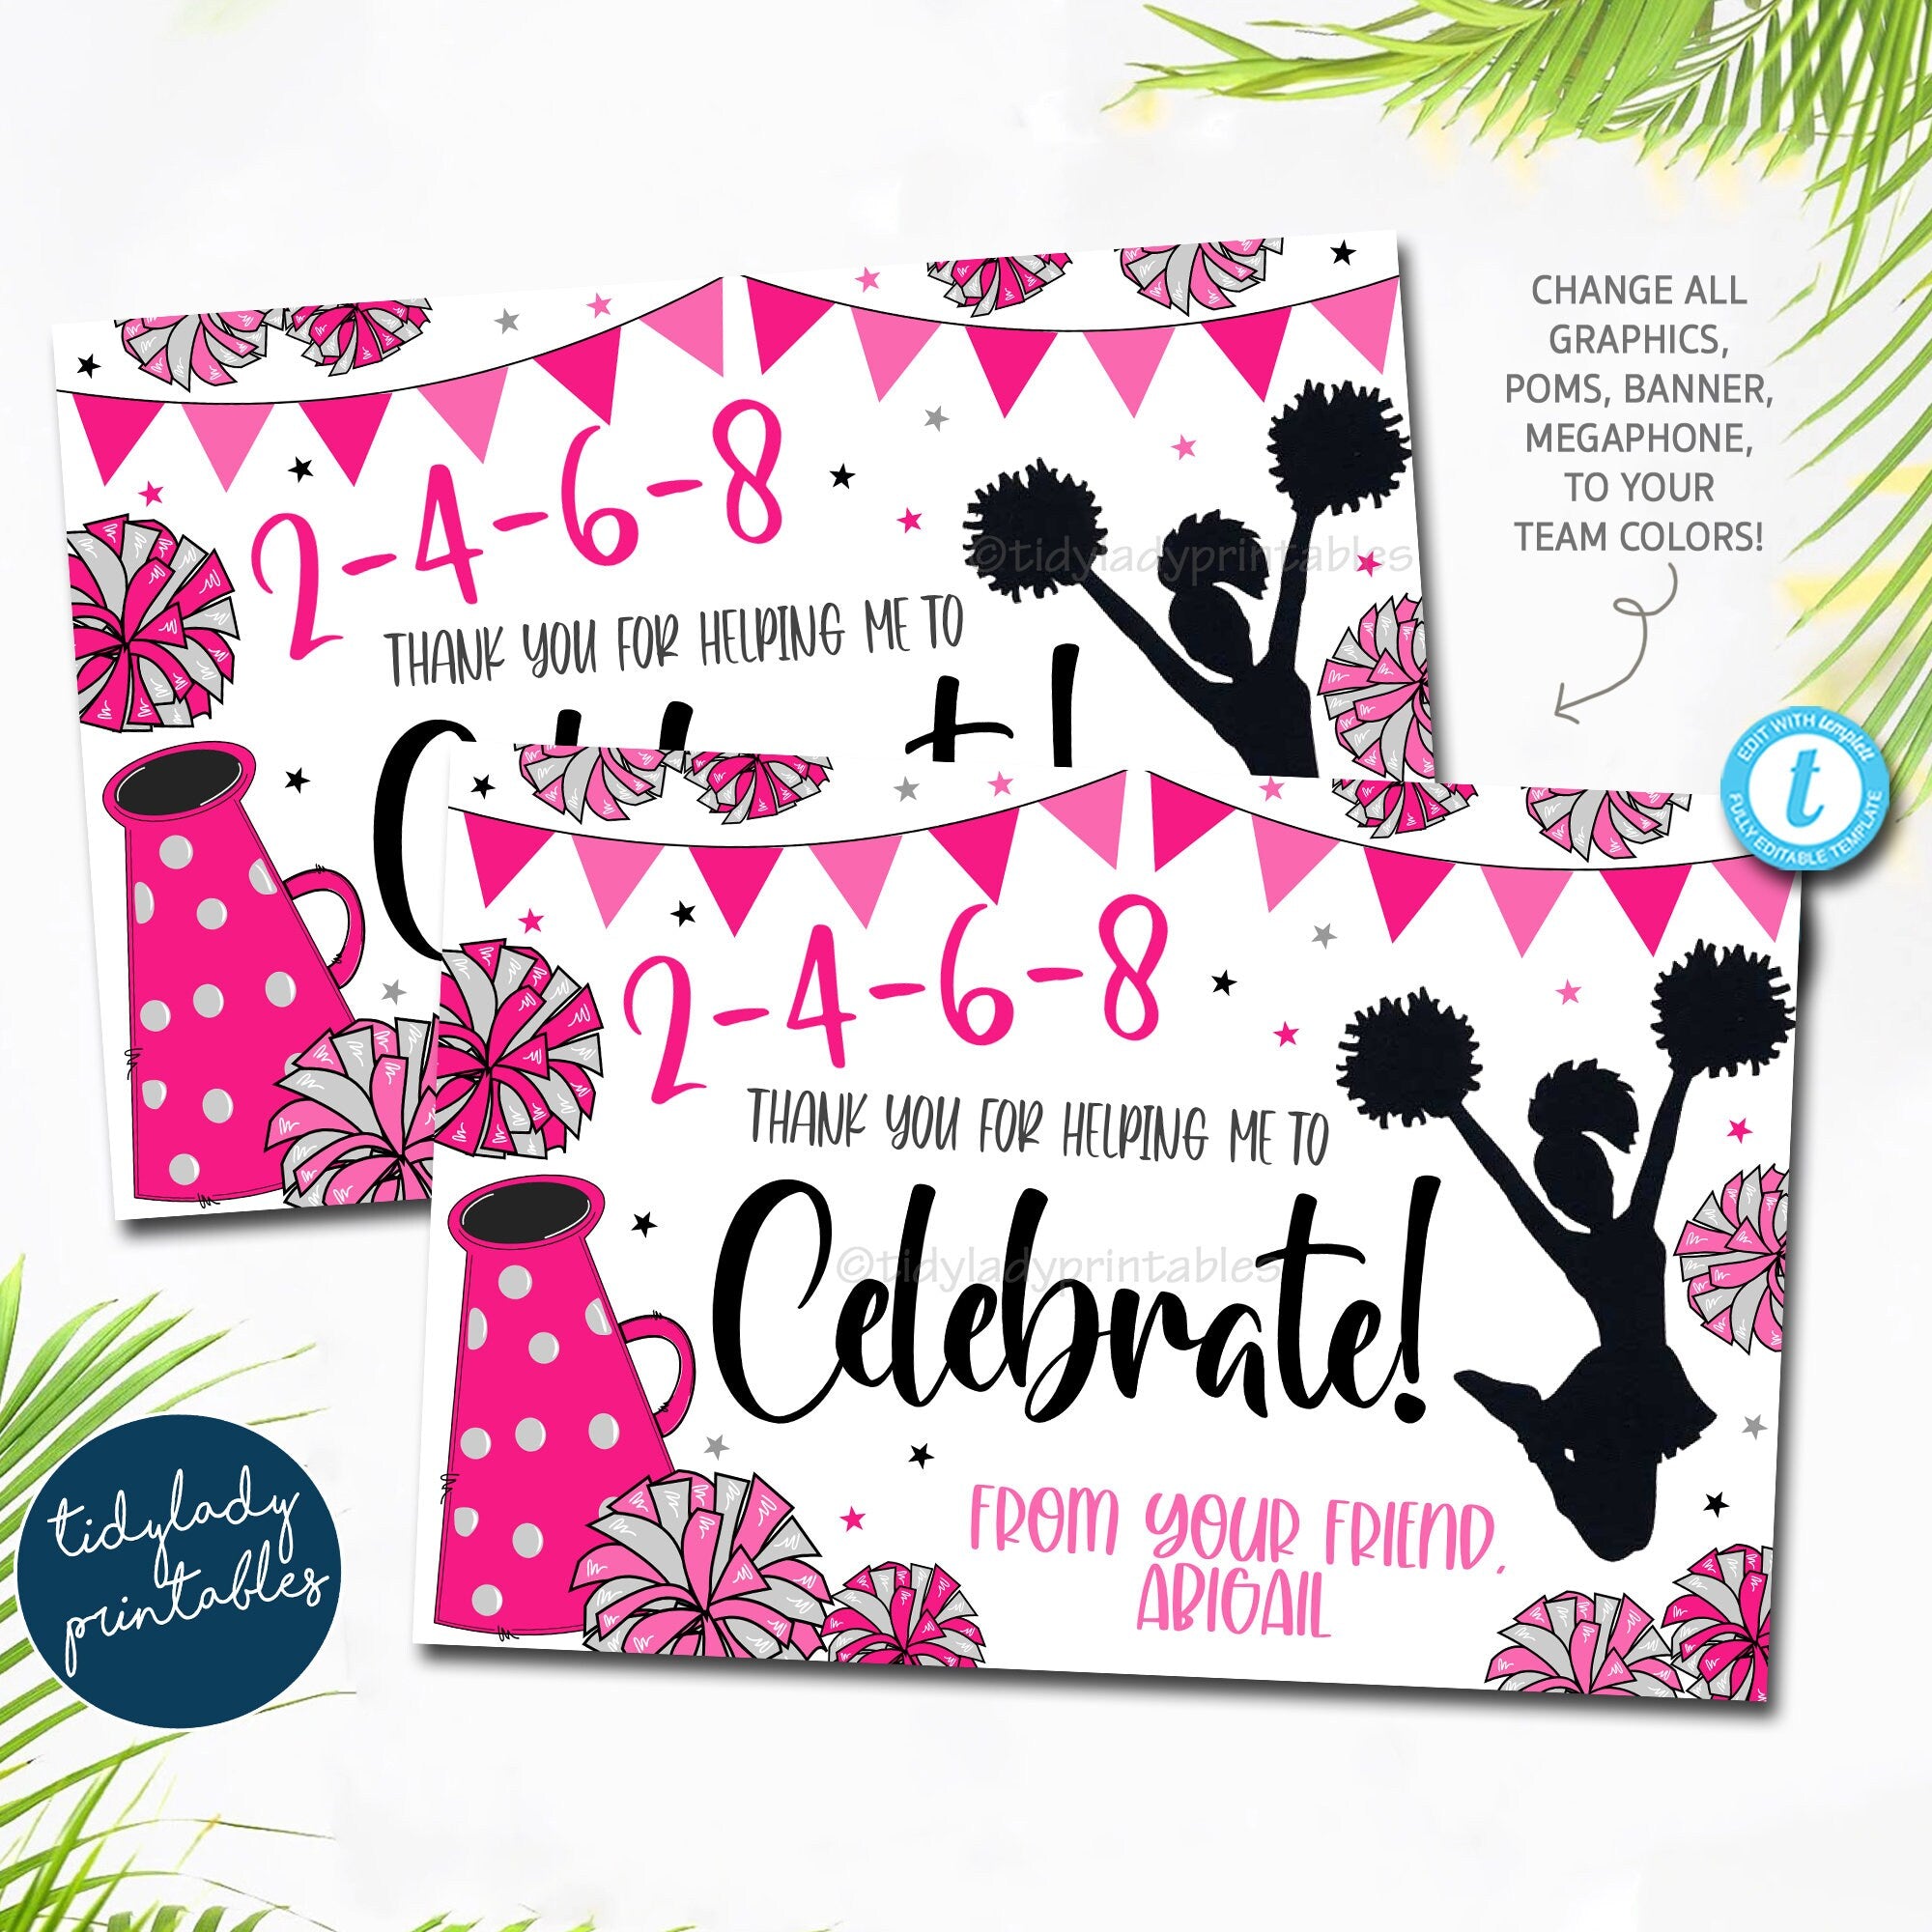 cheer up cards printable